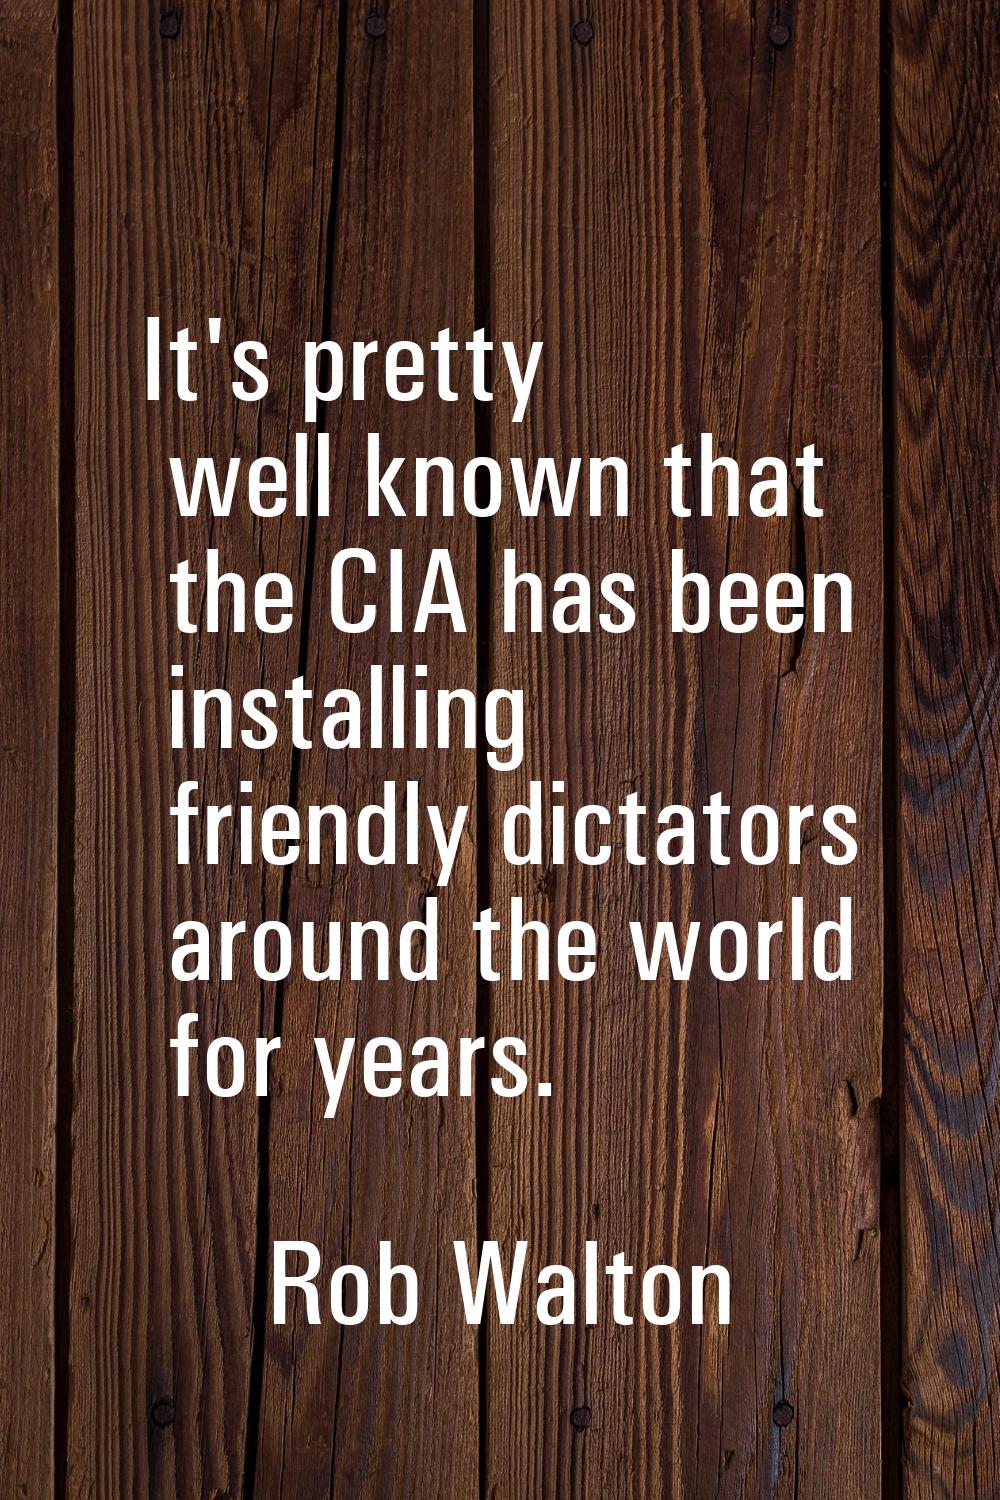 It's pretty well known that the CIA has been installing friendly dictators around the world for yea